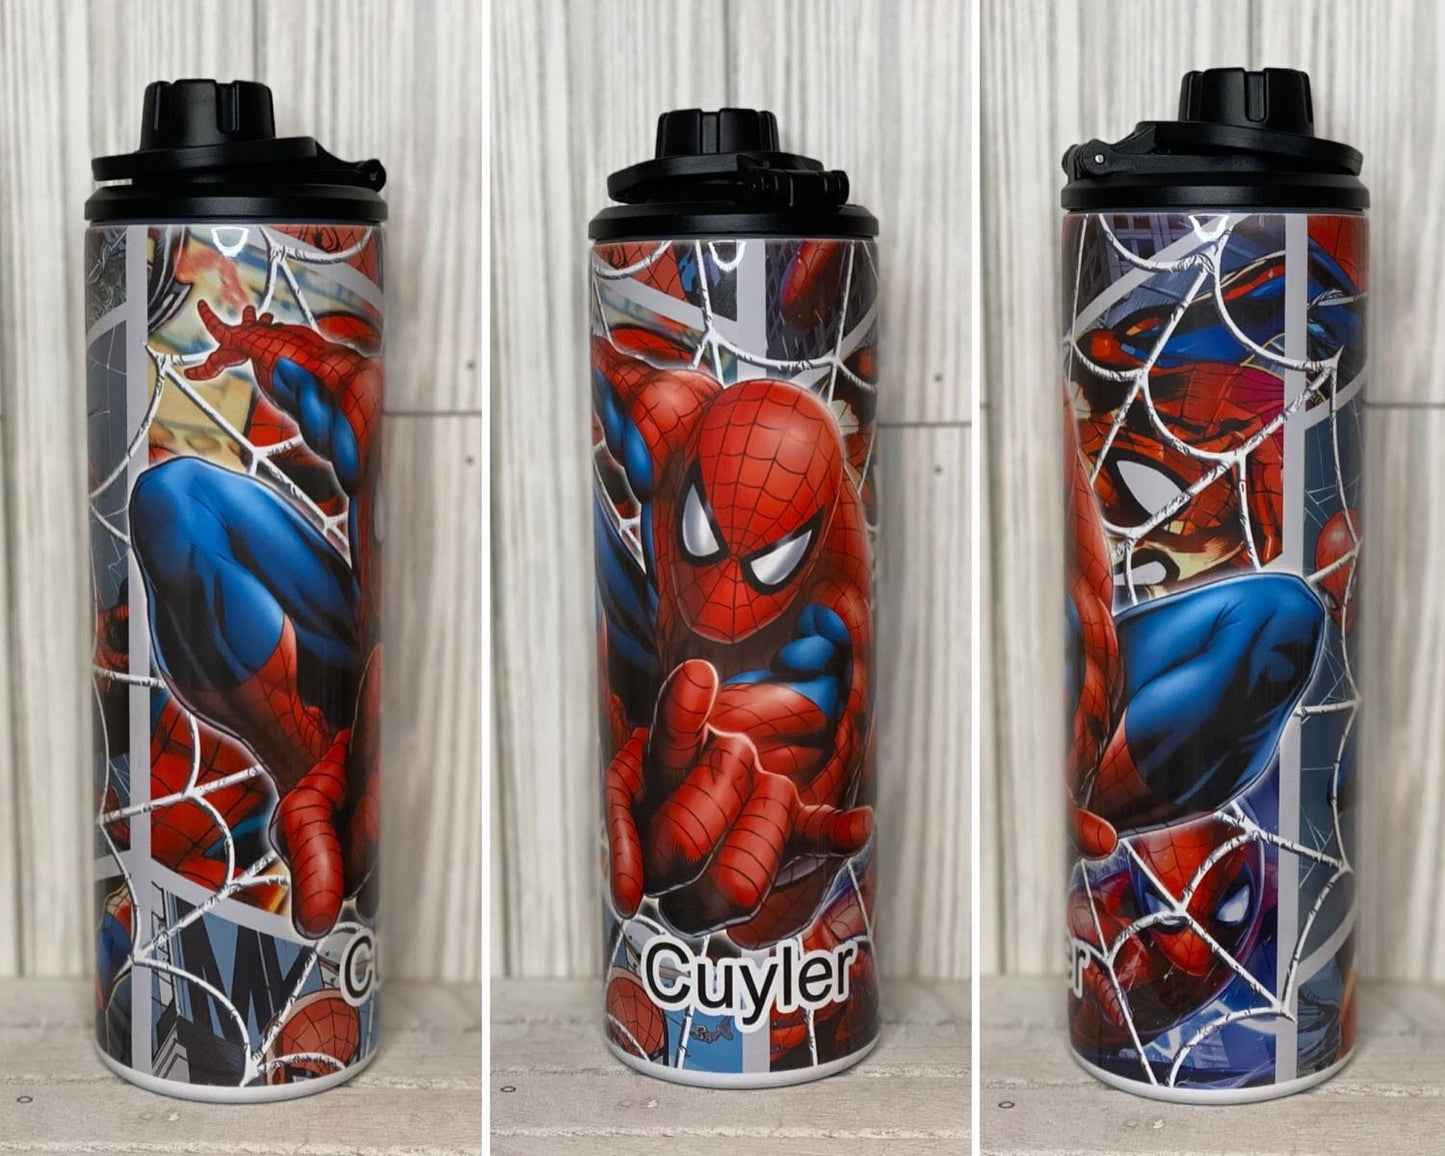 Buy SKI Polo Spiderman Print Round Plastic Insulated Water Bottle